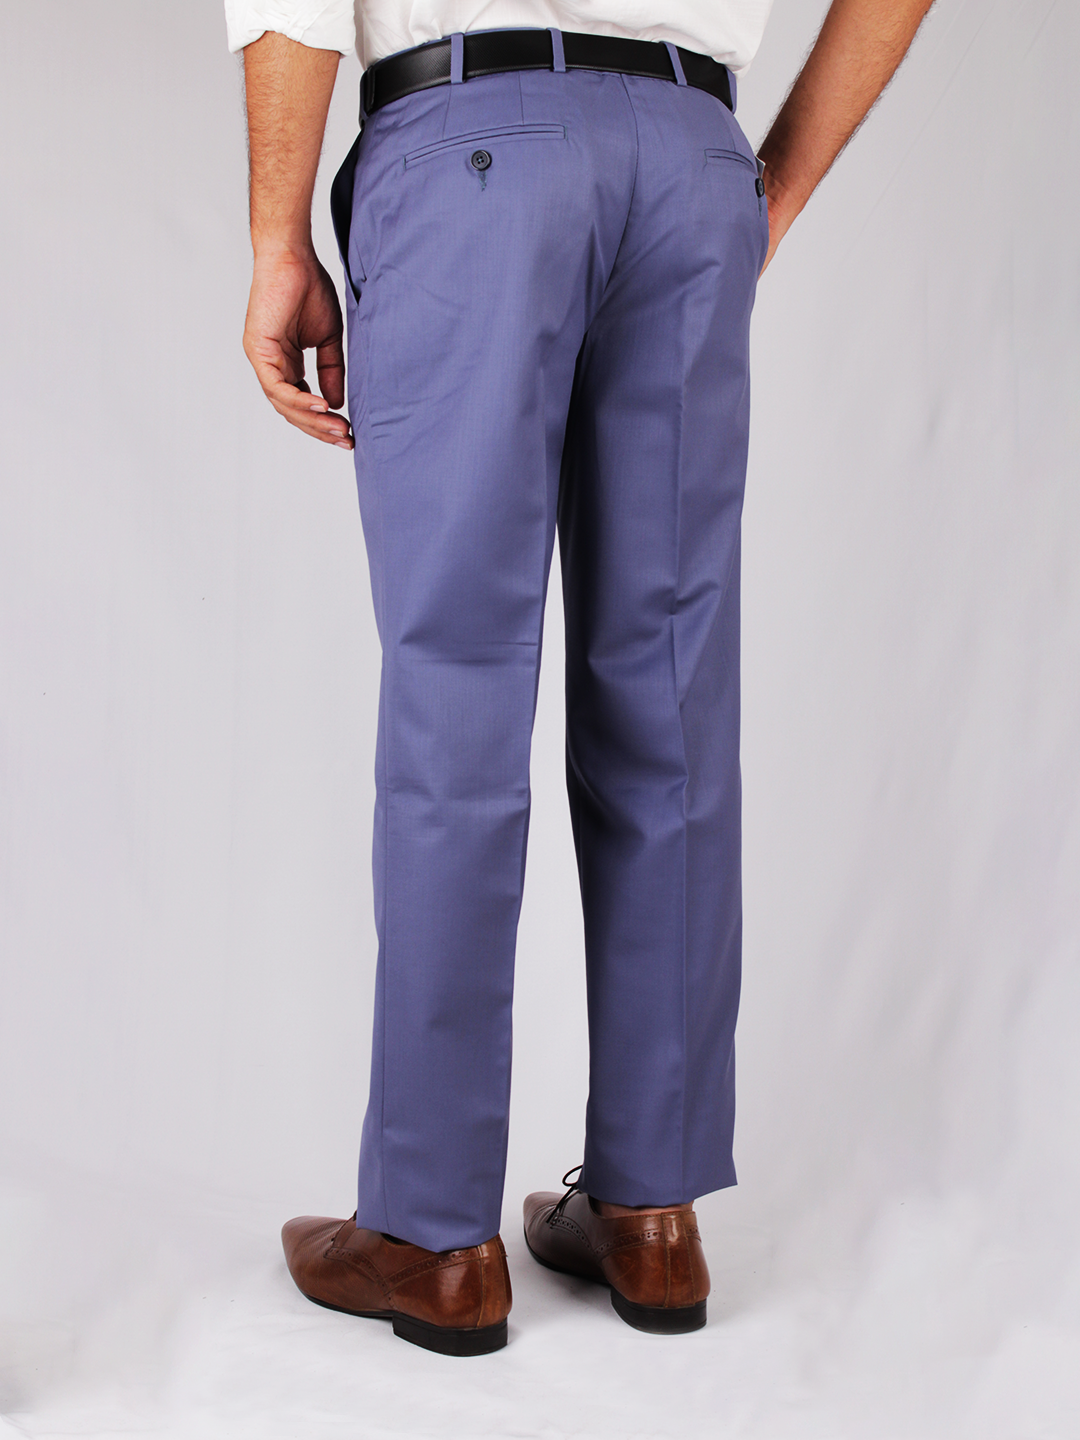 Uniqlo navy blue formal pants, Men's Fashion, Bottoms, Trousers on Carousell